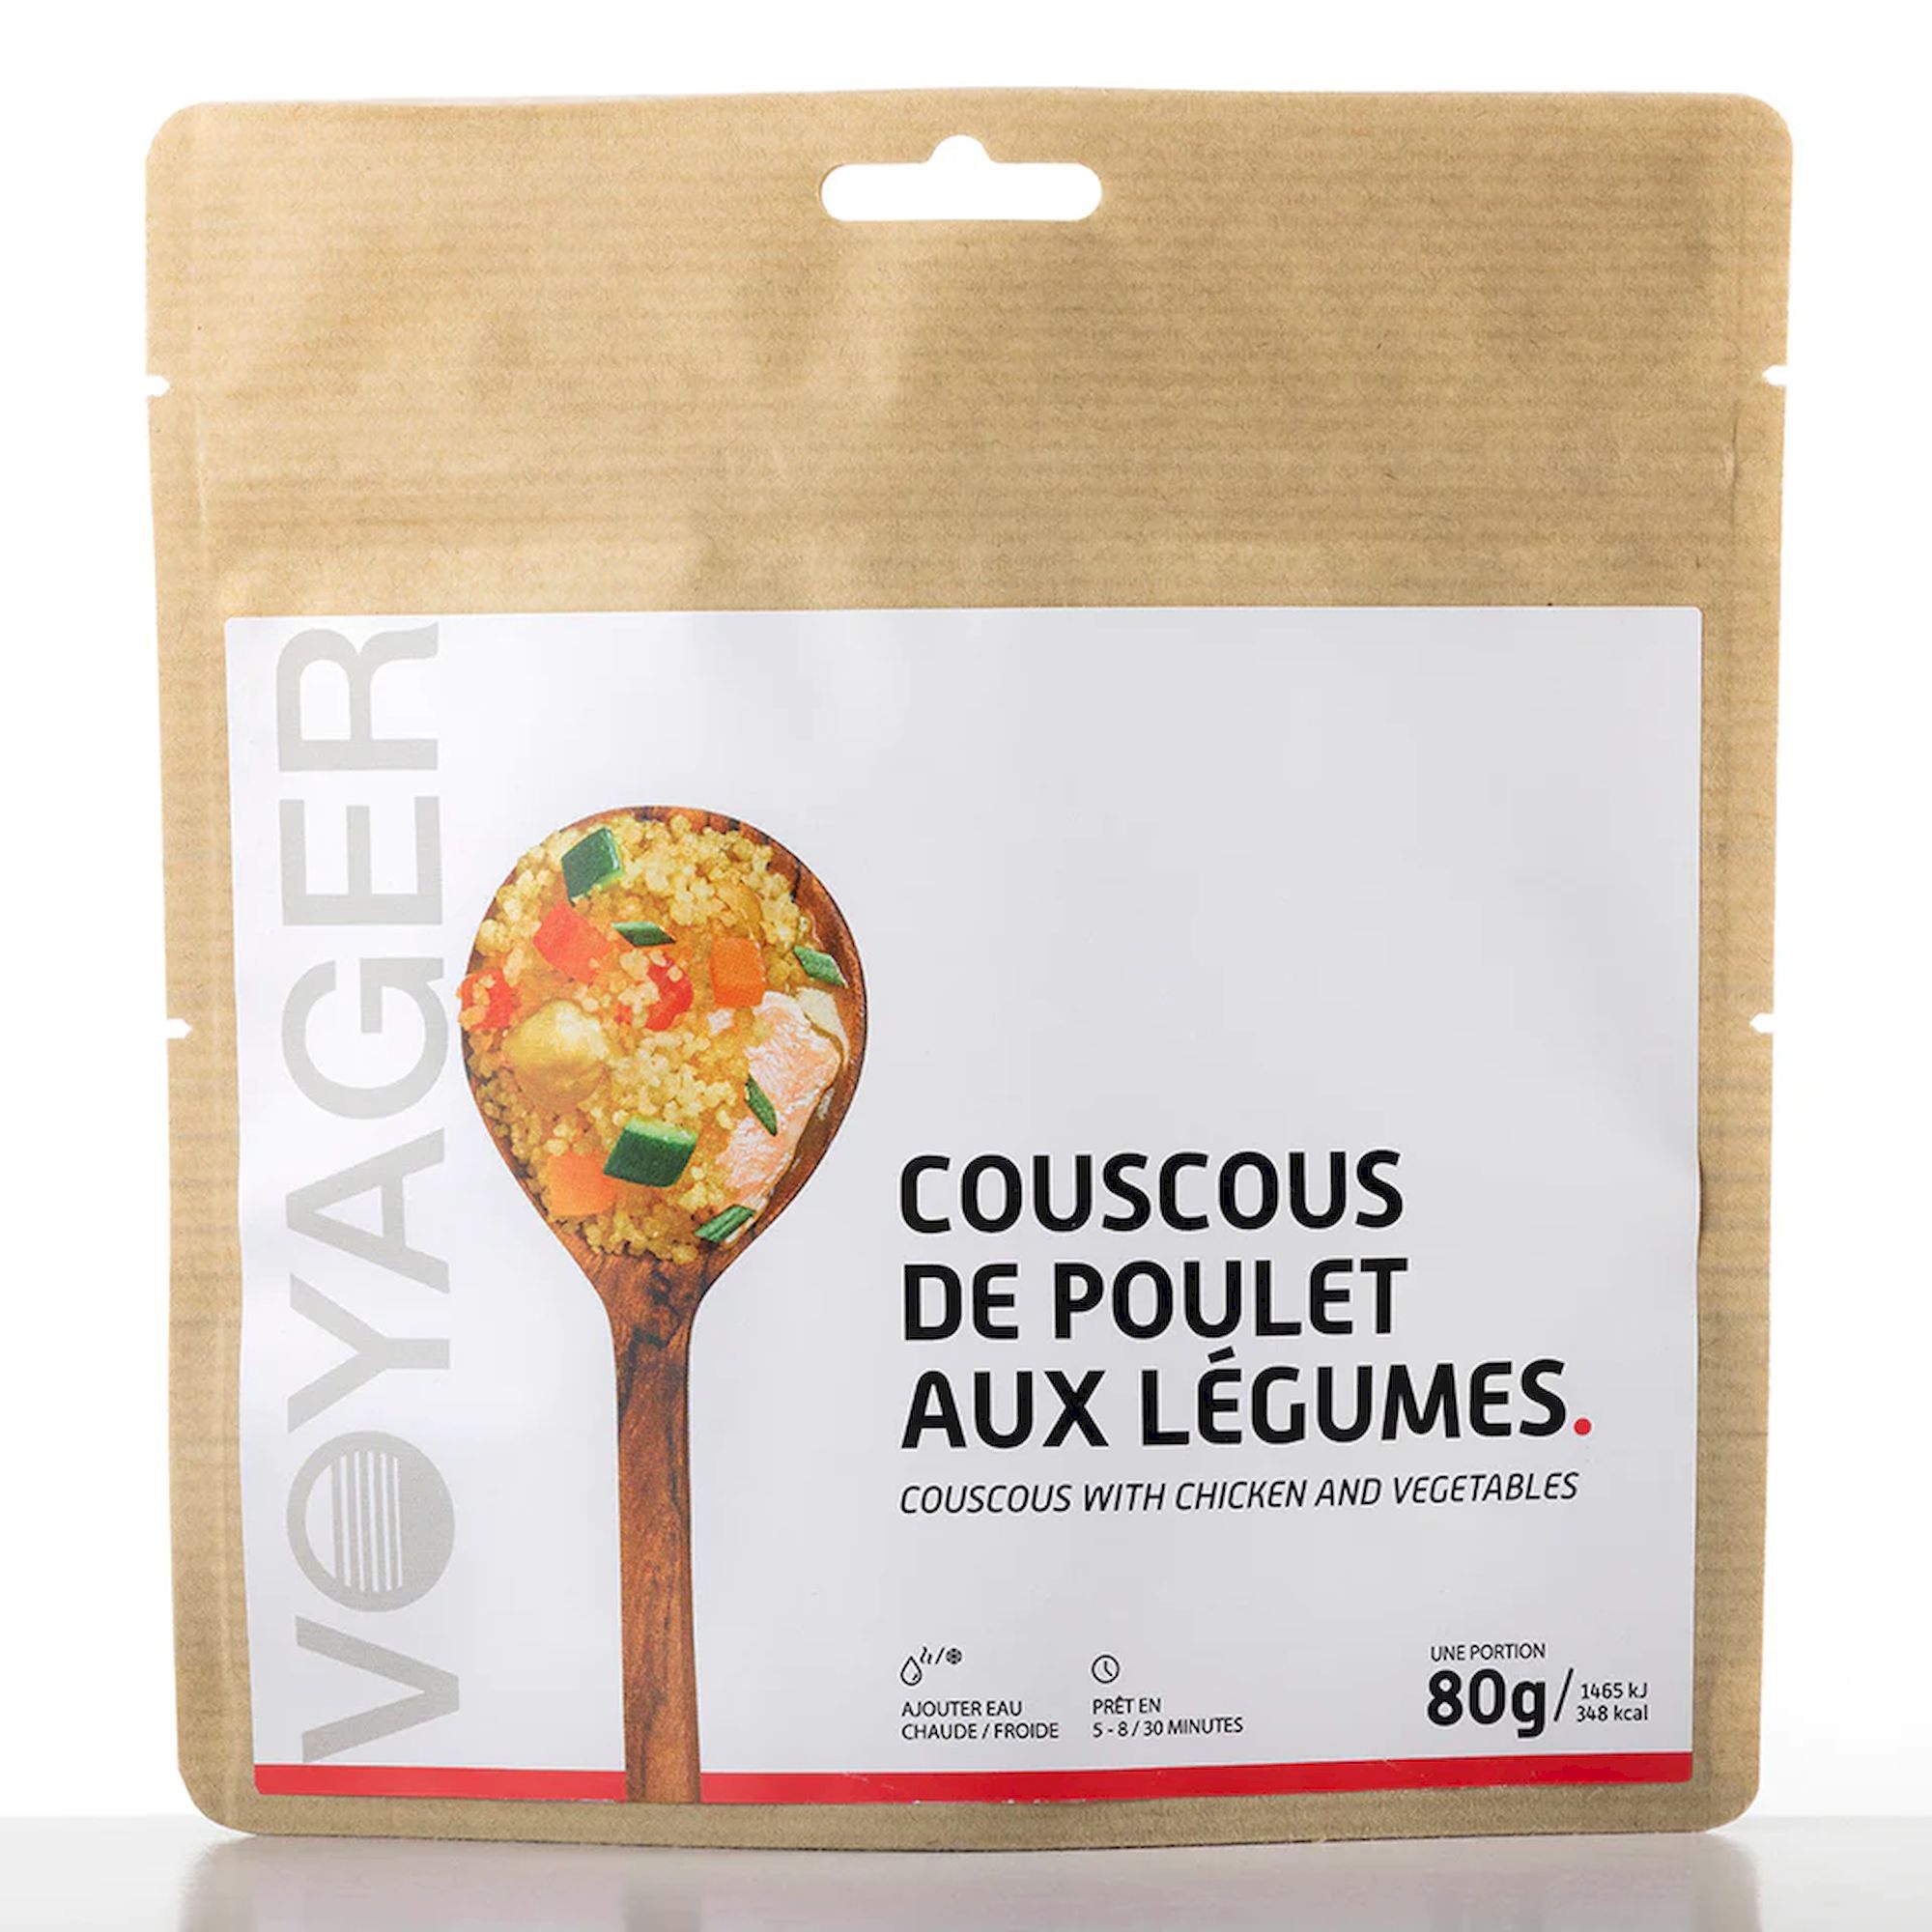 Voyager Nutrition Couscous with Chicken and Vegetables - Hlavní jídlo | Hardloop